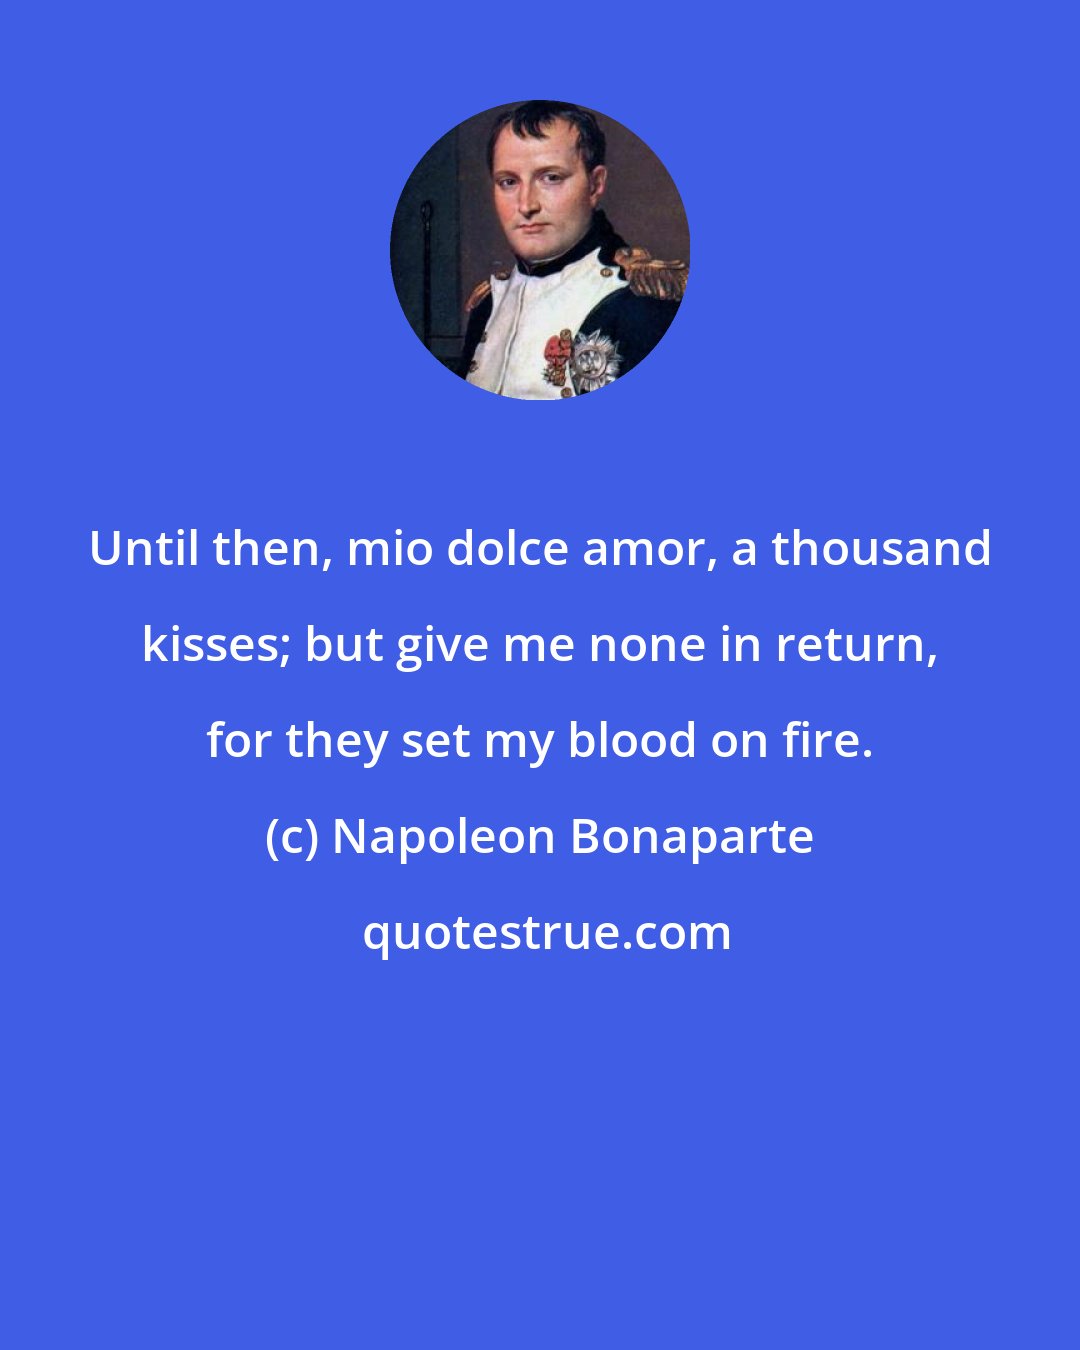 Napoleon Bonaparte: Until then, mio dolce amor, a thousand kisses; but give me none in return, for they set my blood on fire.